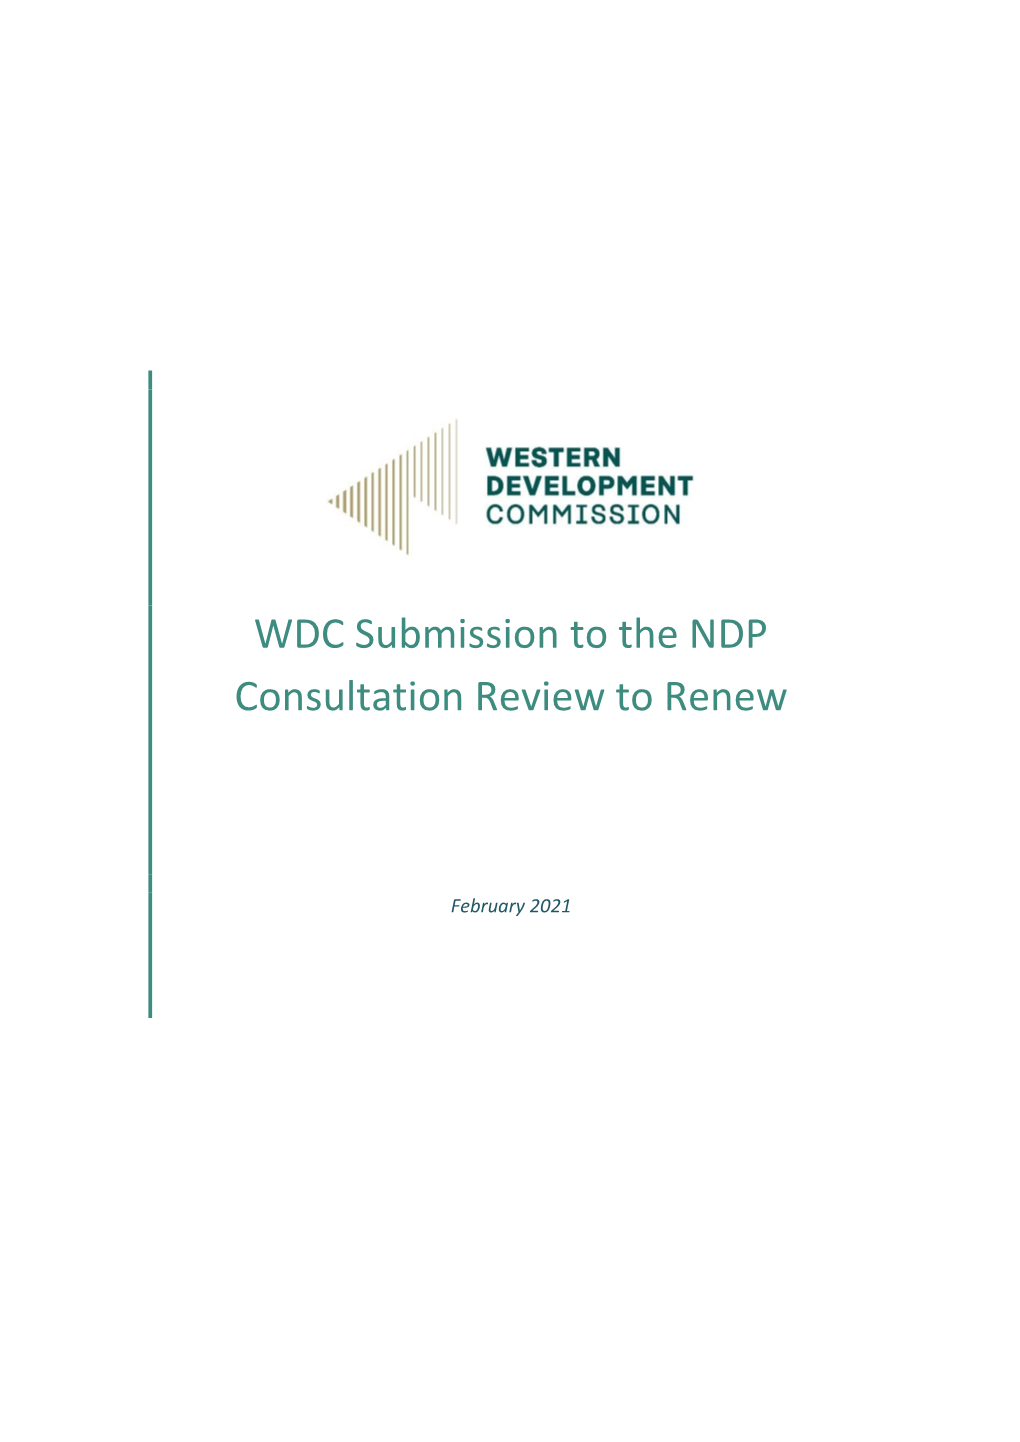 WDC Submission to the NDP Consultation Review to Renew